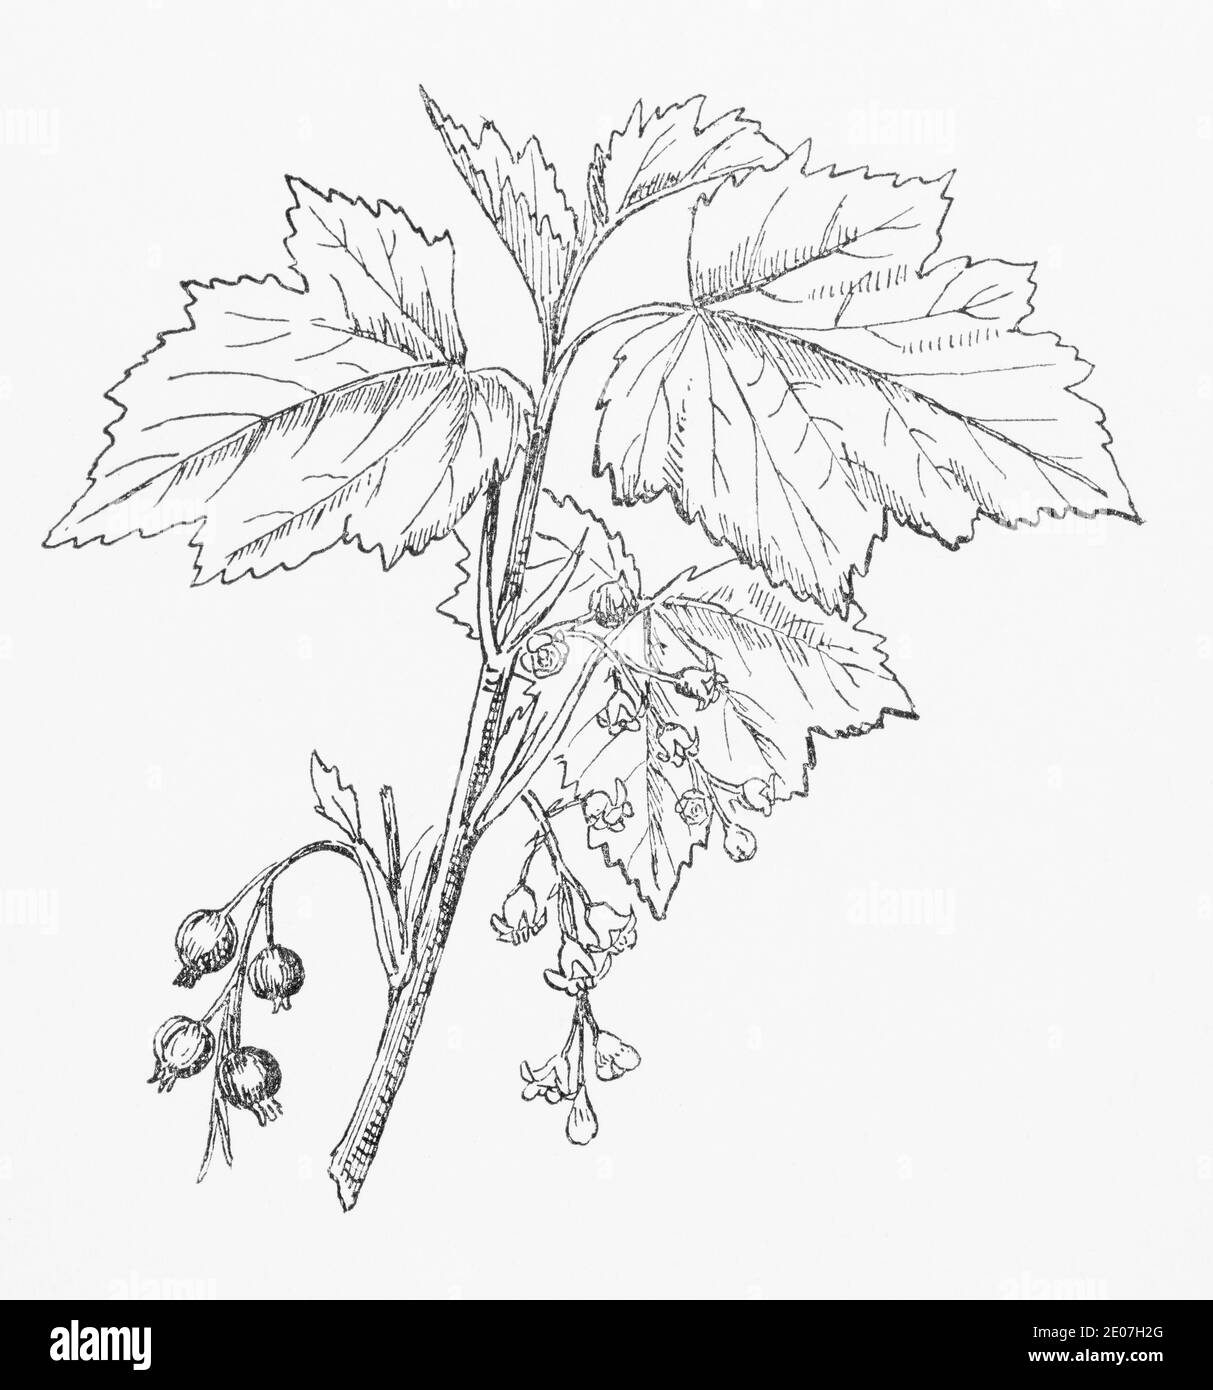 Old botanical illustration engraving of Black Currant, Blackcurrant / Ribes nigrum. Traditional medicinal herbal plant. See Notes Stock Photo